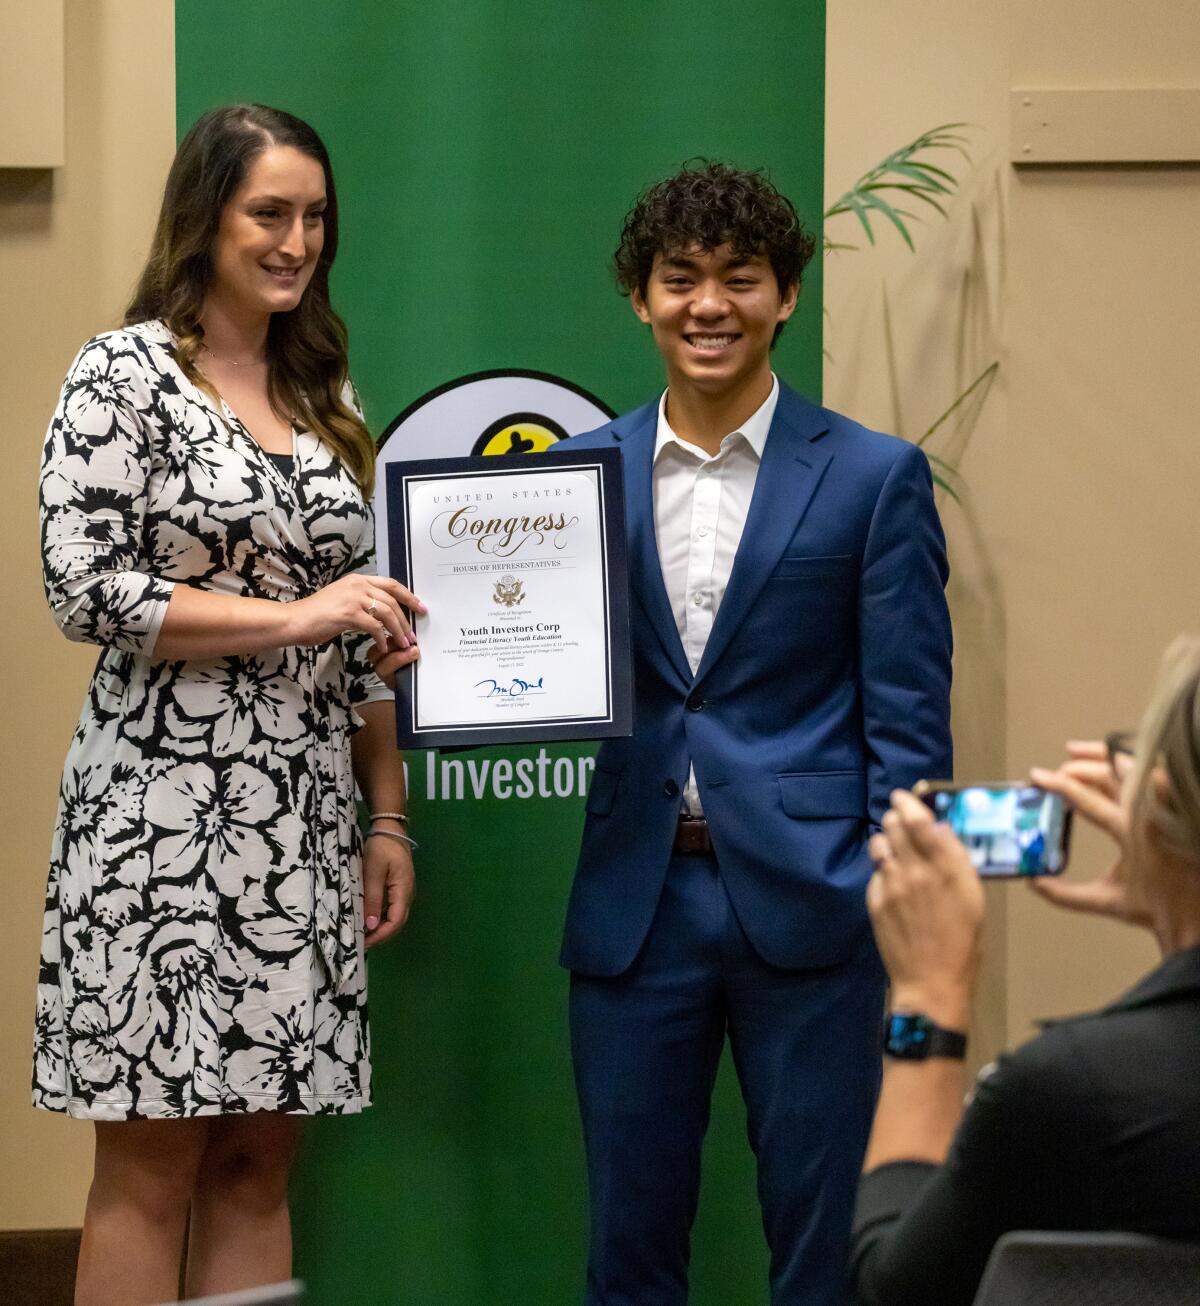 Dylan Jin-Ngo, right, is presented with a certificate of recognition for his dedication to financial literacy education.